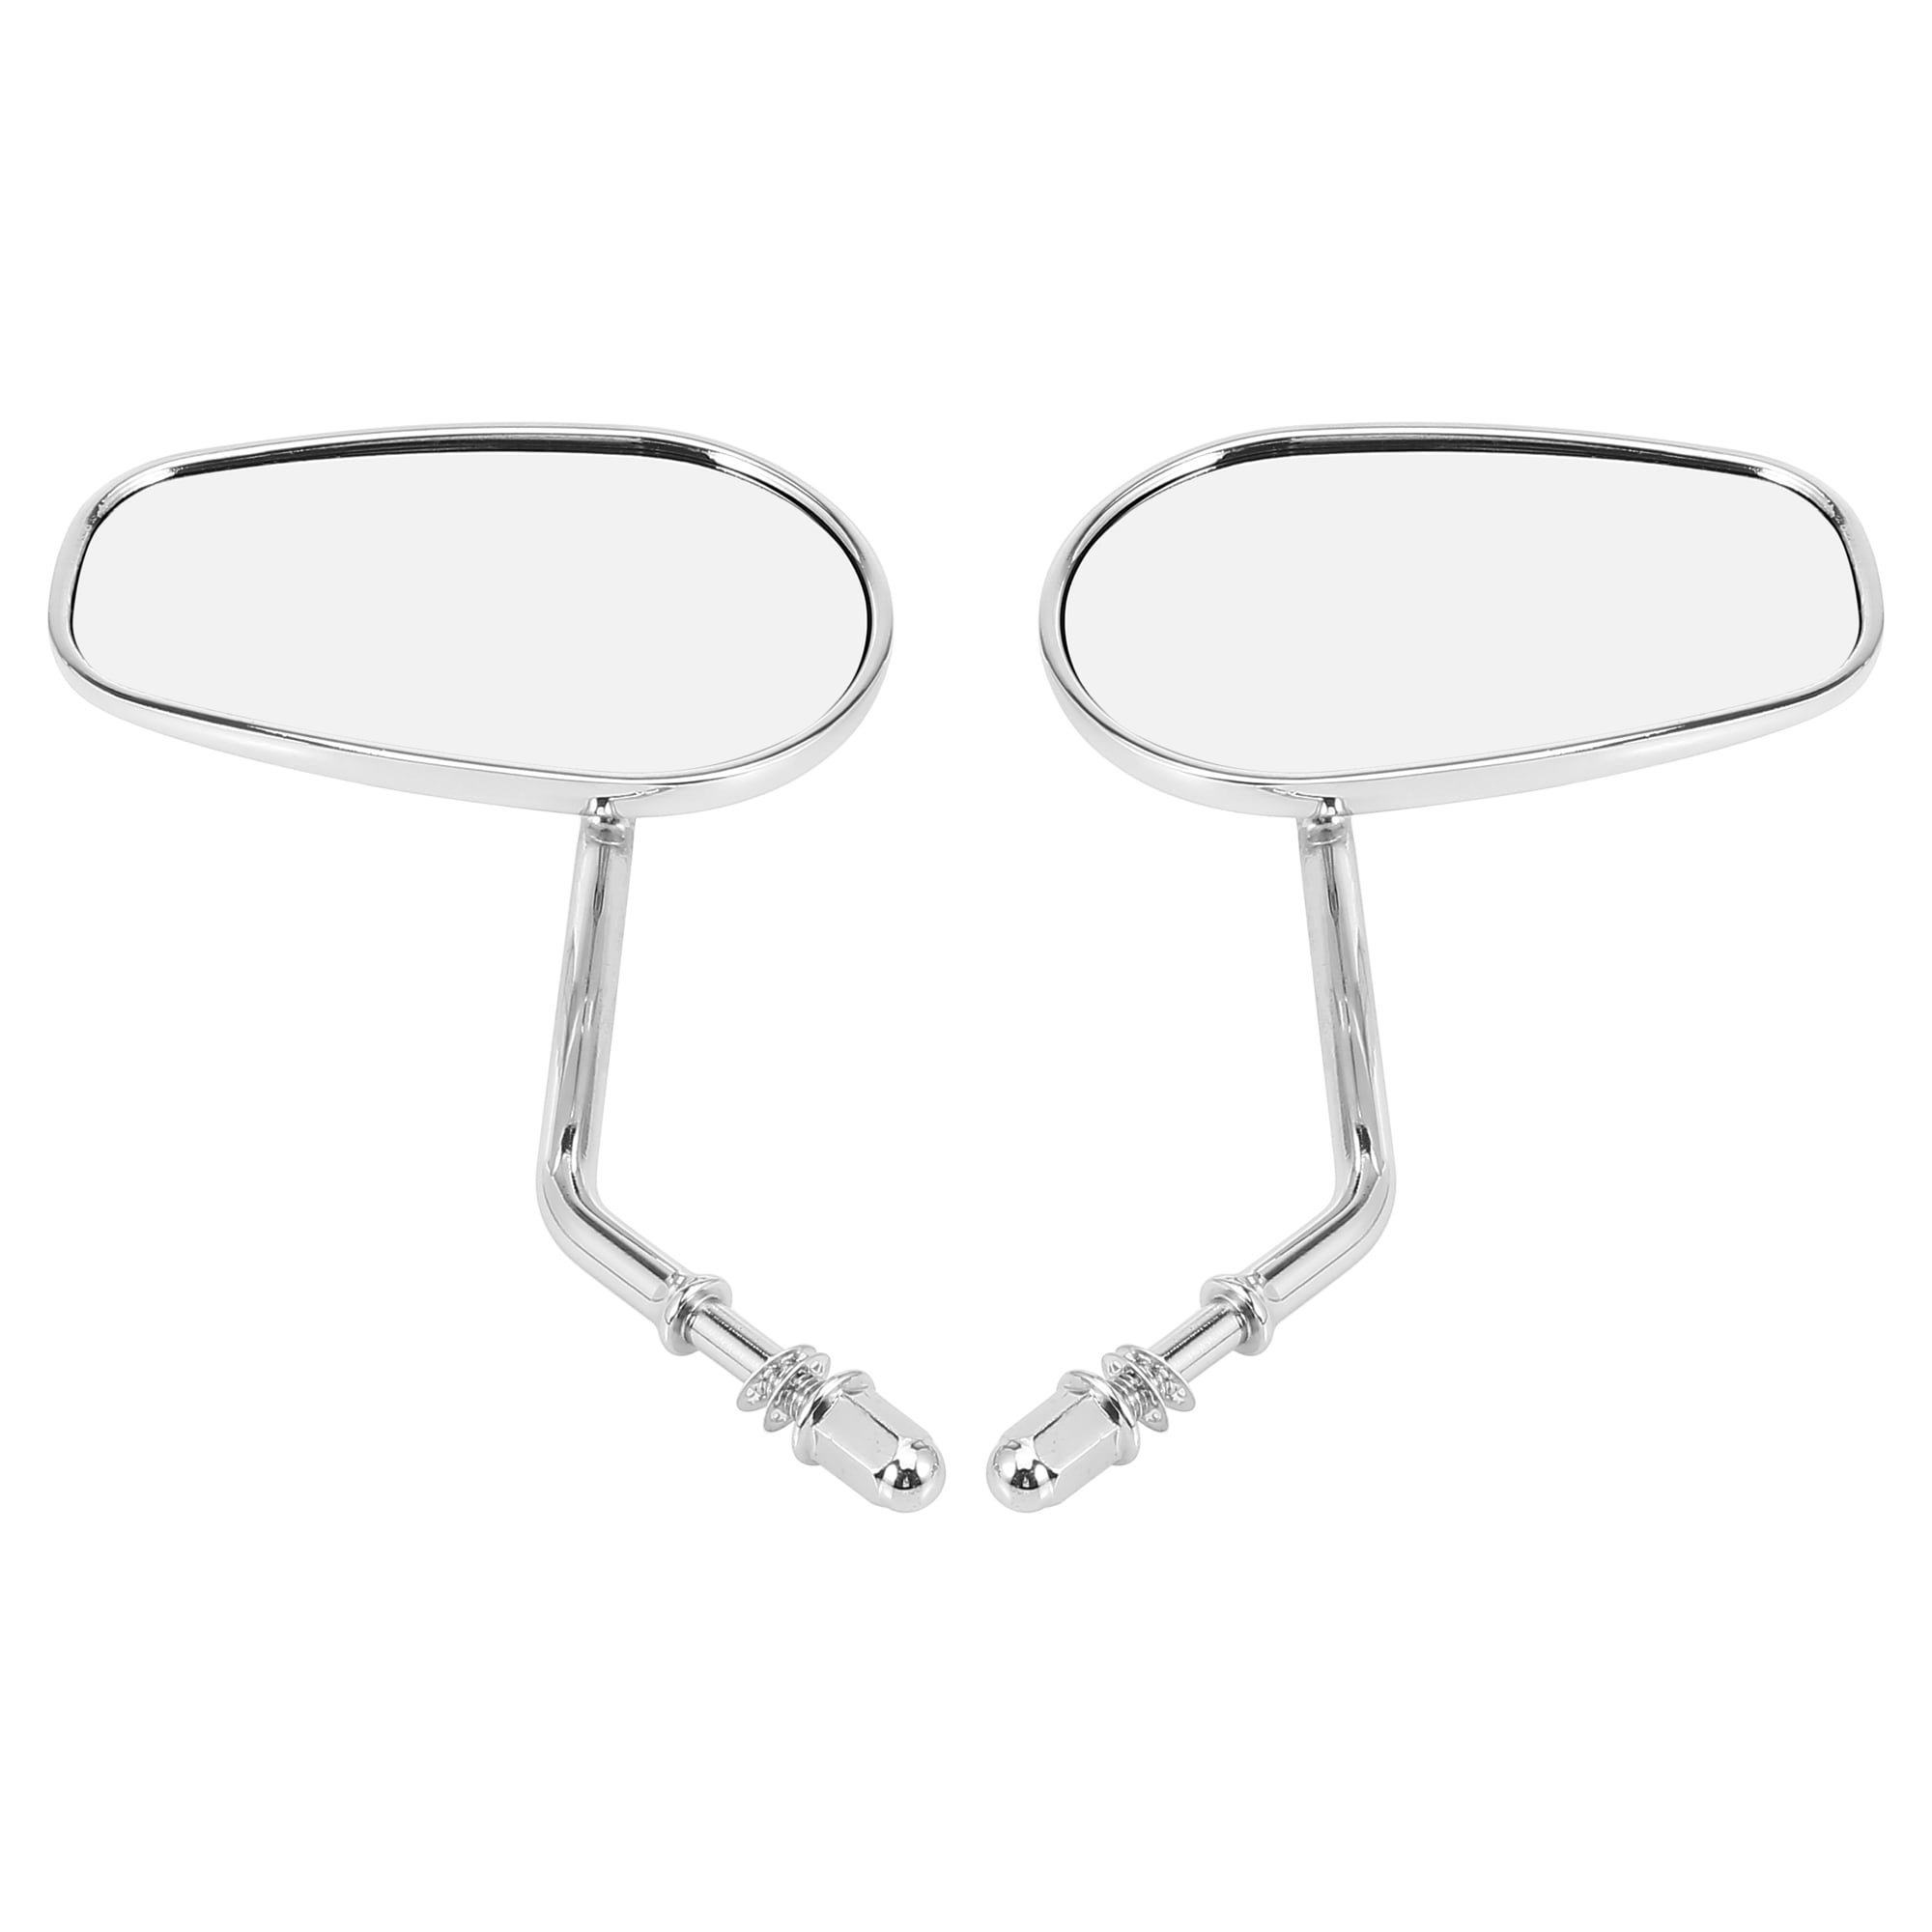 F FIERCE CYCLE 1 Pair Universal Motorcycle Side Rearview Mirror Oval Shape for Handlebar Mount Chrome Silver Tone 